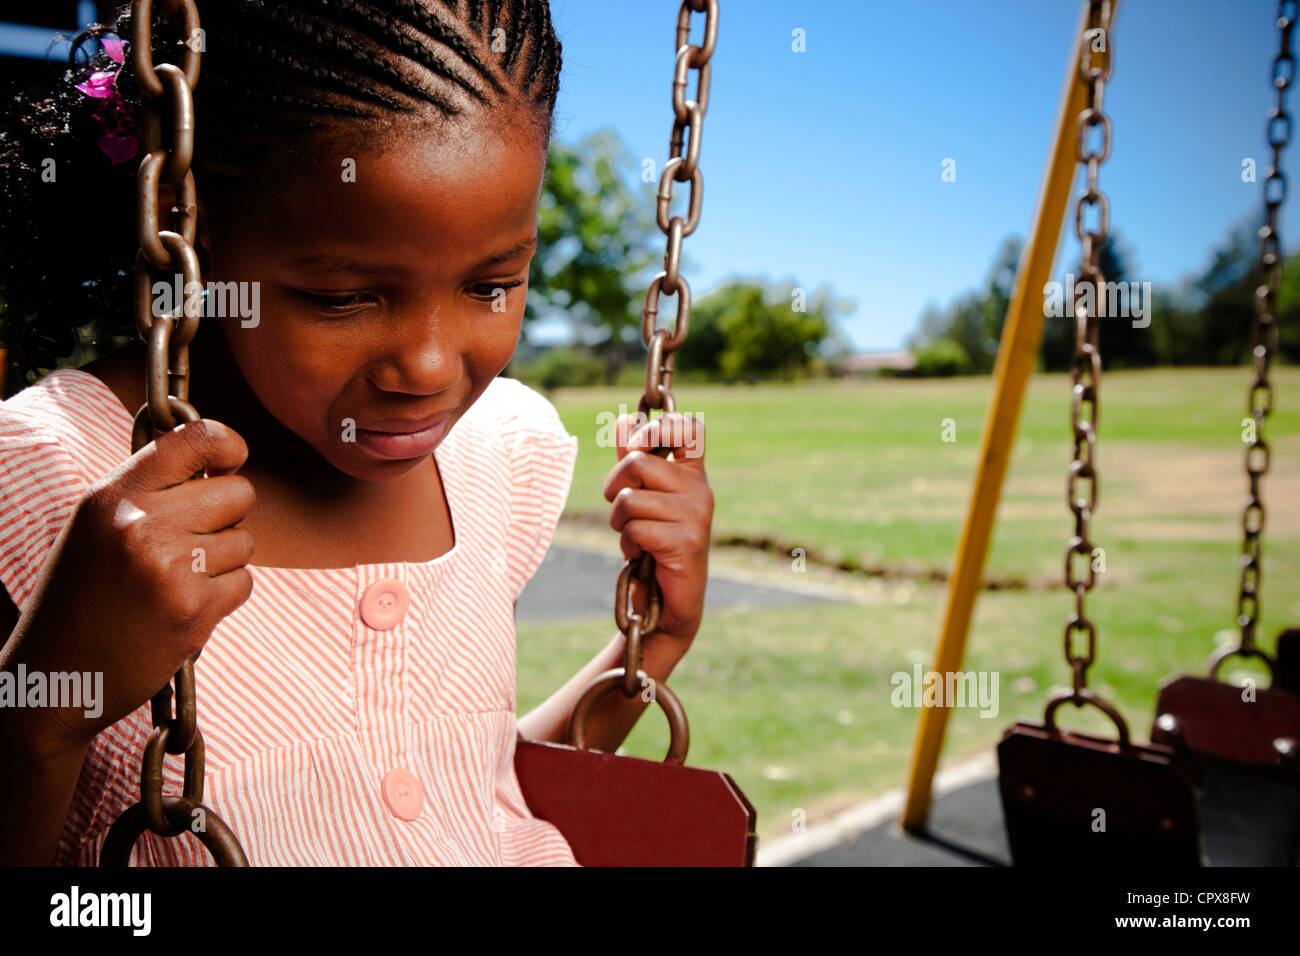 A little girl sitting on a swing looking sad Stock Photo